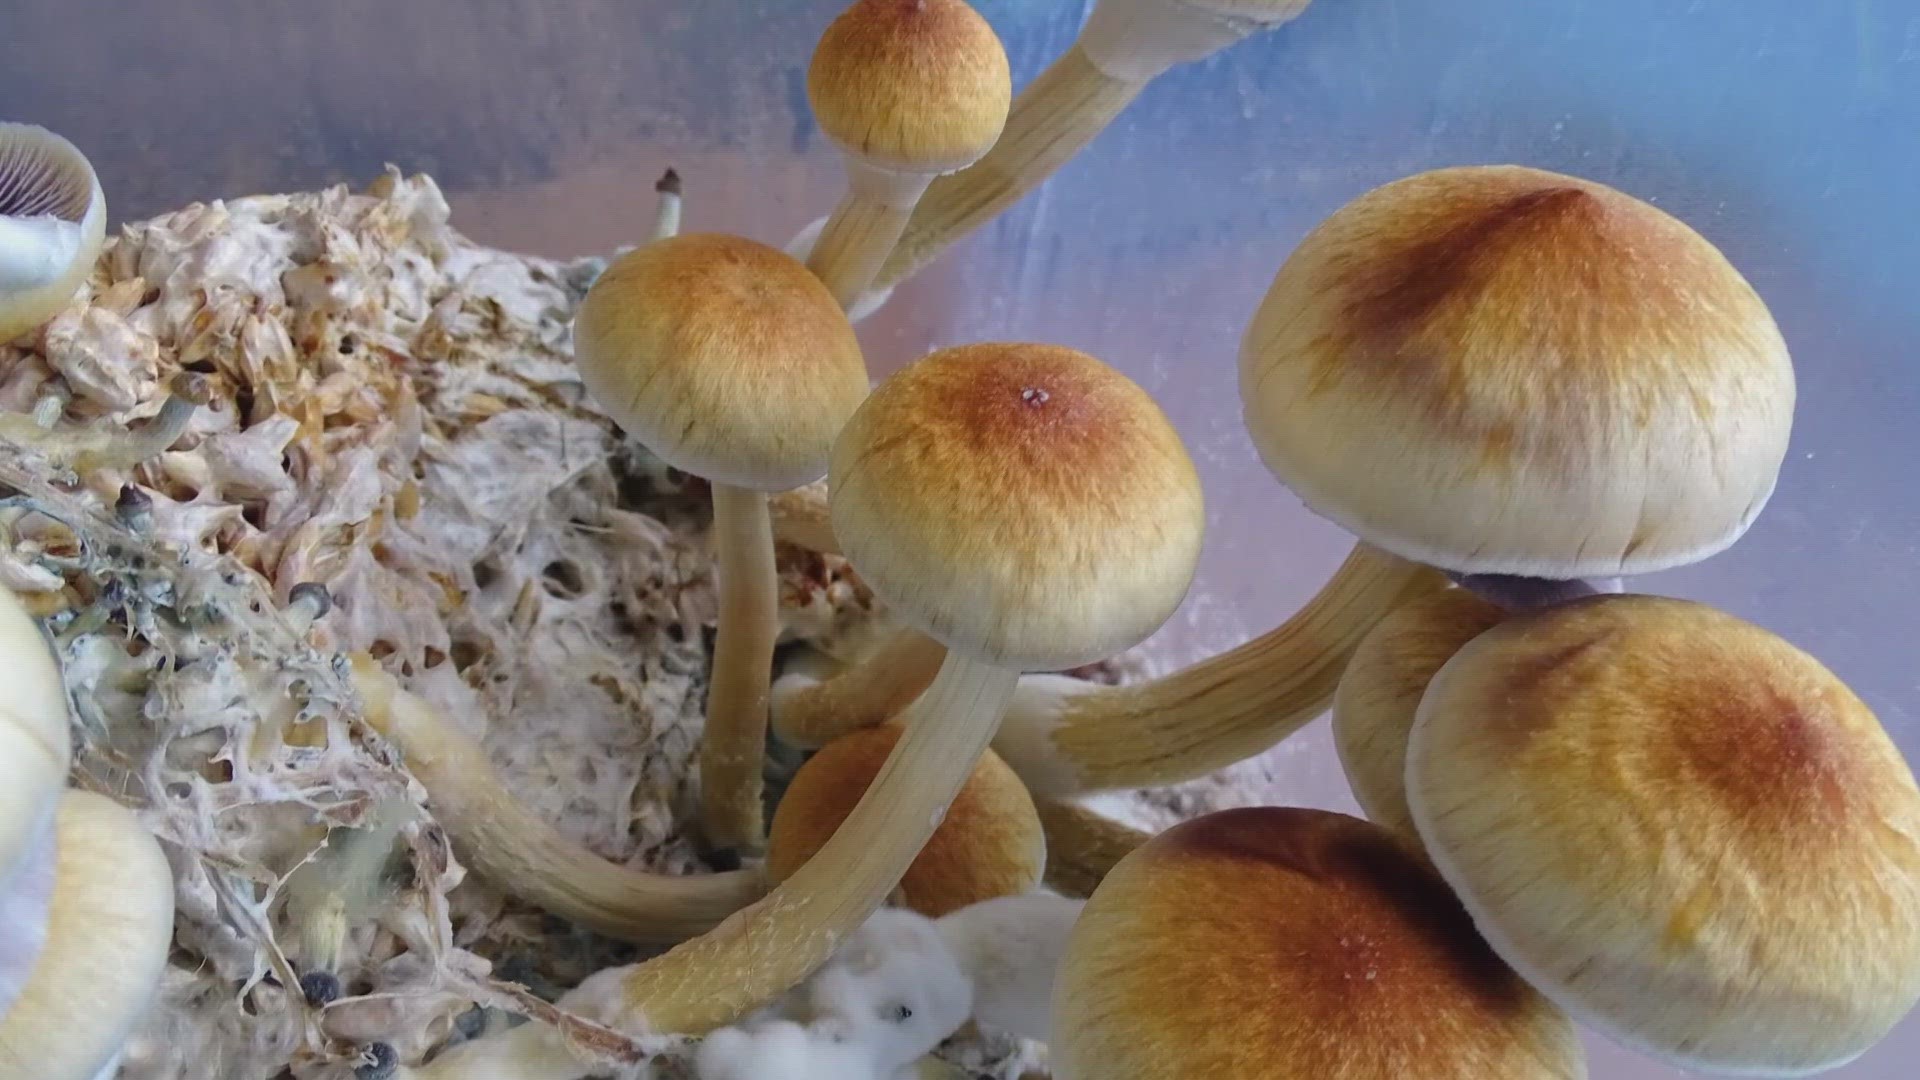 Naropa University in Boulder has a new minor in mushrooms as part of the school's Bachelor of Arts degree program and it's open to all undergrad students.